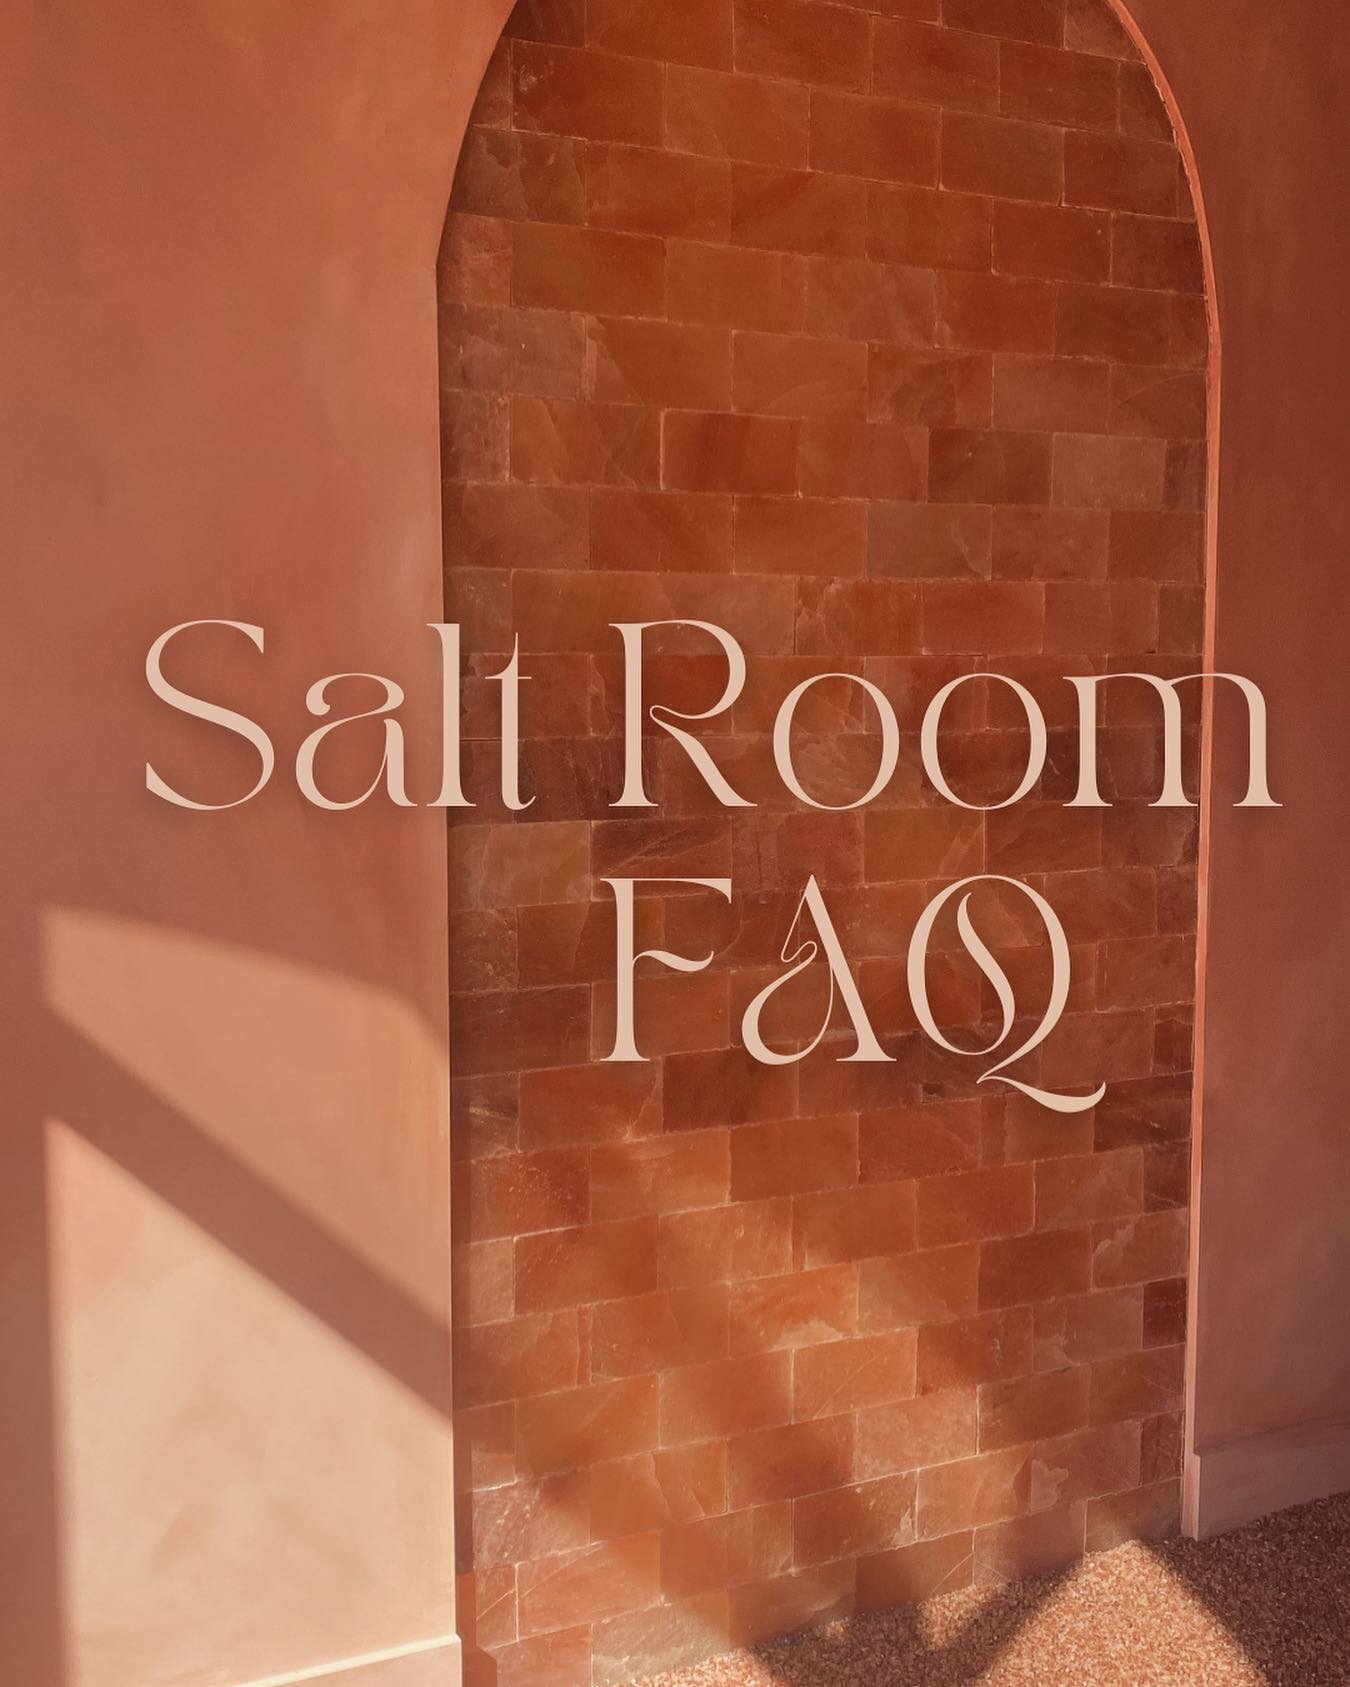 Now that our stunning Salt Room is open, we wanted to share some faqs with you.

Hydration
Hydrate well before and after your session as food and liquids can&rsquo;t come with you into the salt room. 

Booking
We&rsquo;re open by appointment only. Wh